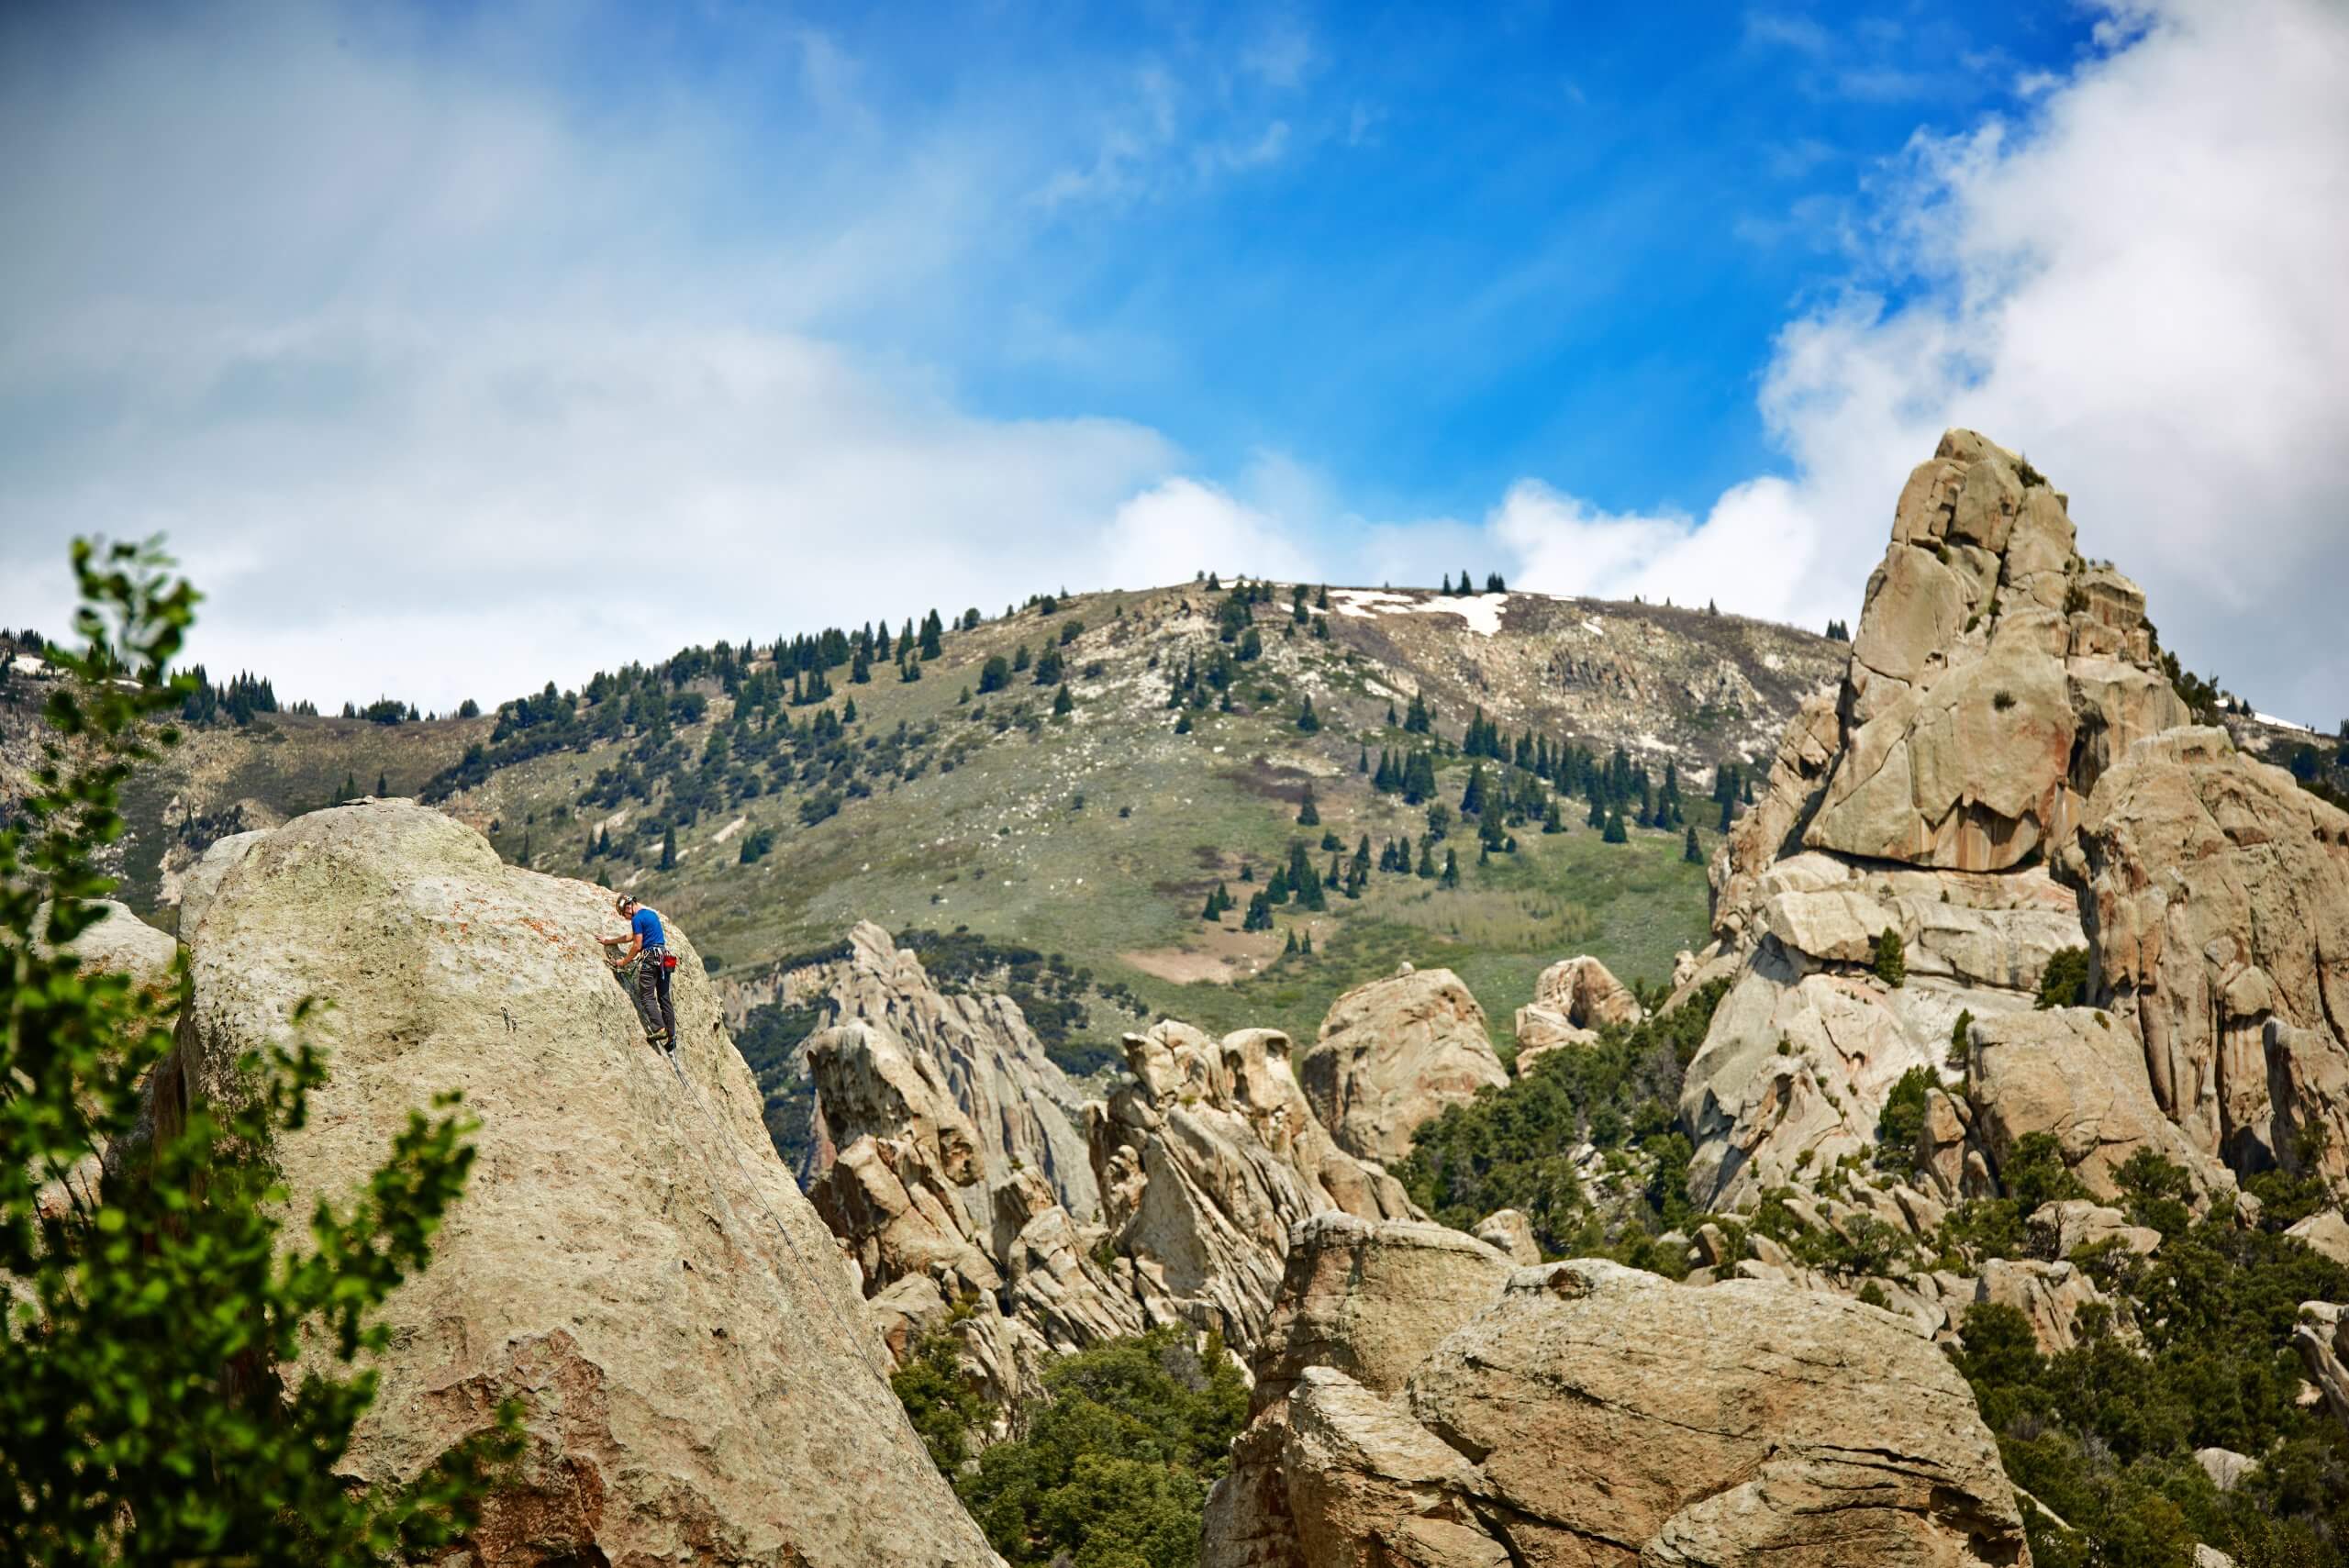 A person climbing one of the many towering rock formations at Castle Rocks State Park.